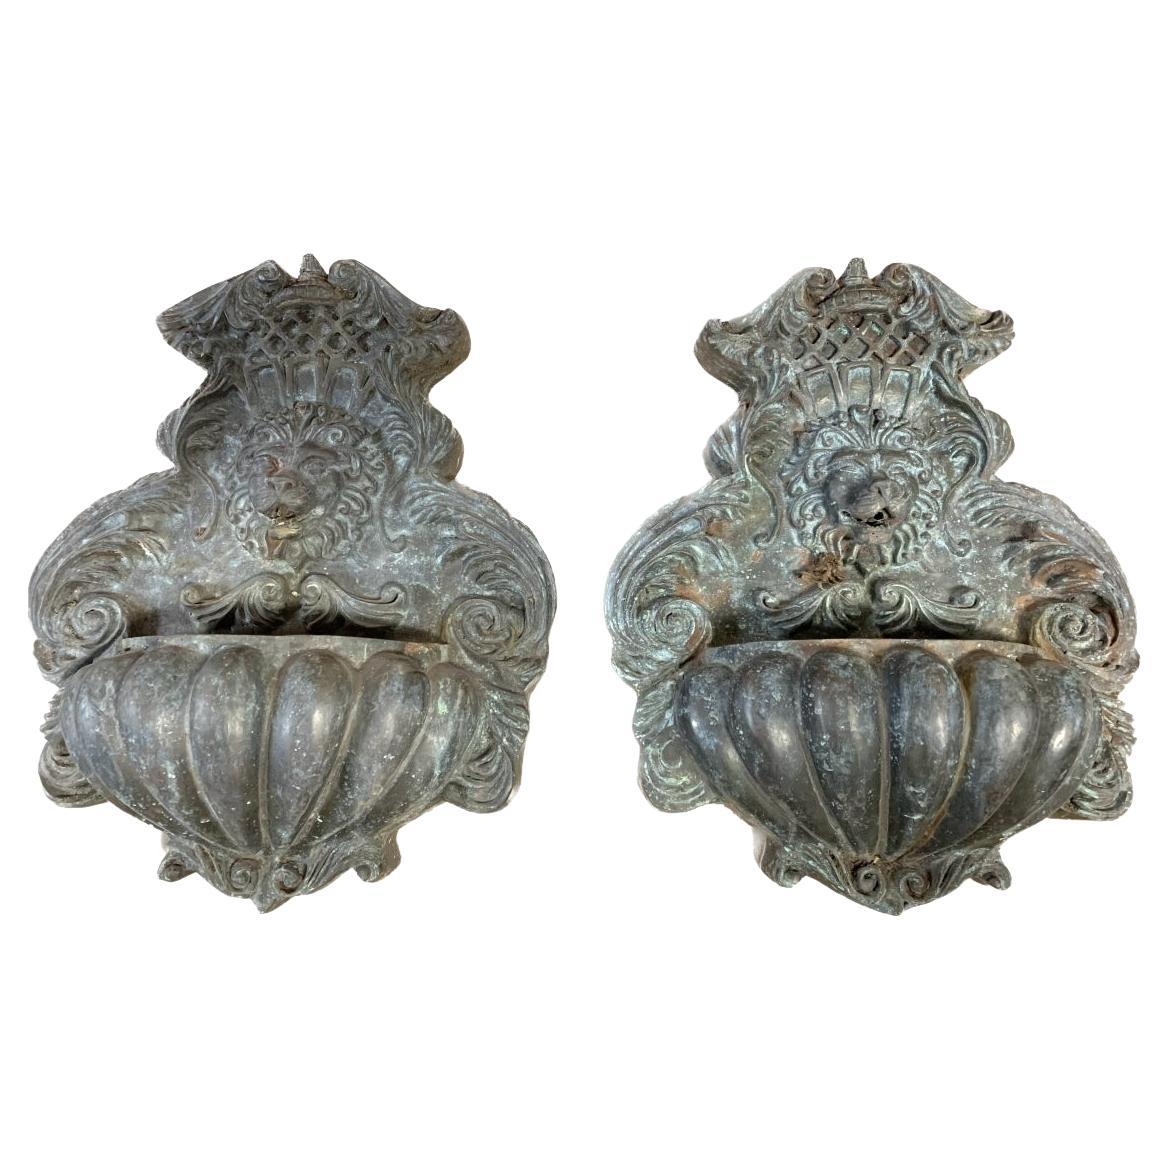 Pair Of 20th Century Bronze Lion Head Outdoor Wall Fountains With Basins